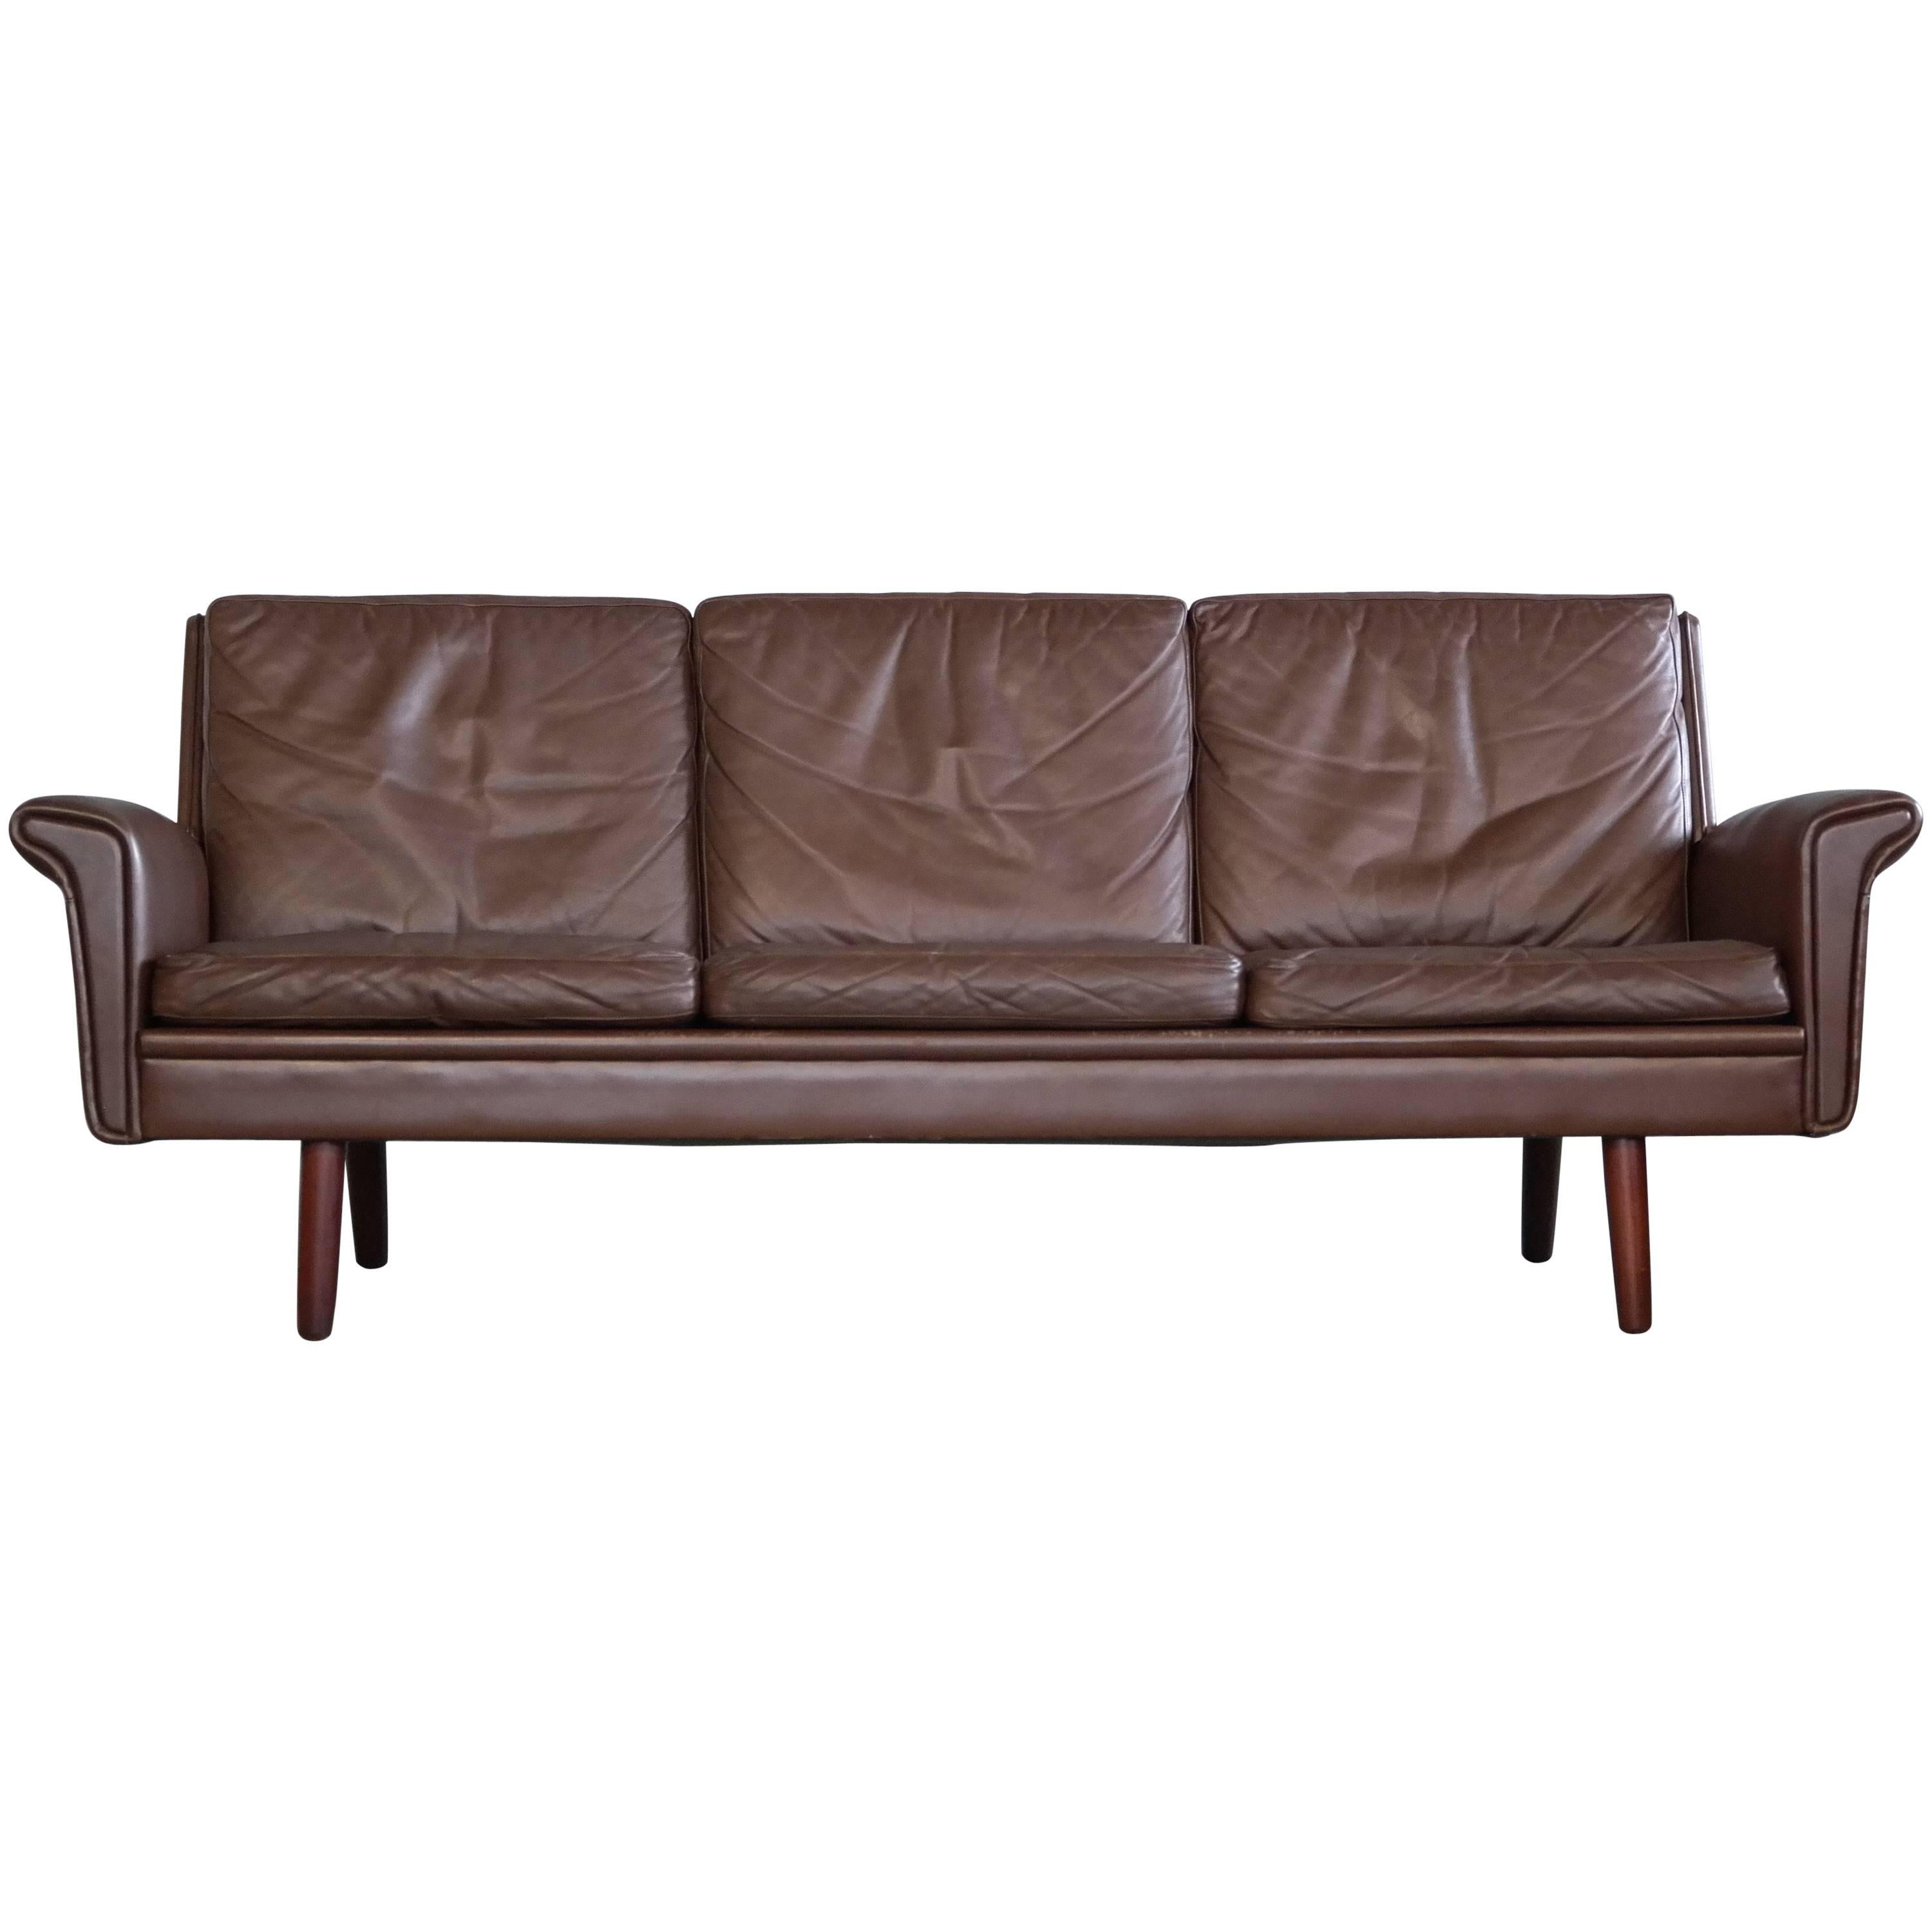 Classic Danish Midcentury Sofa in Chestnut Colored Leather by Georg Thams